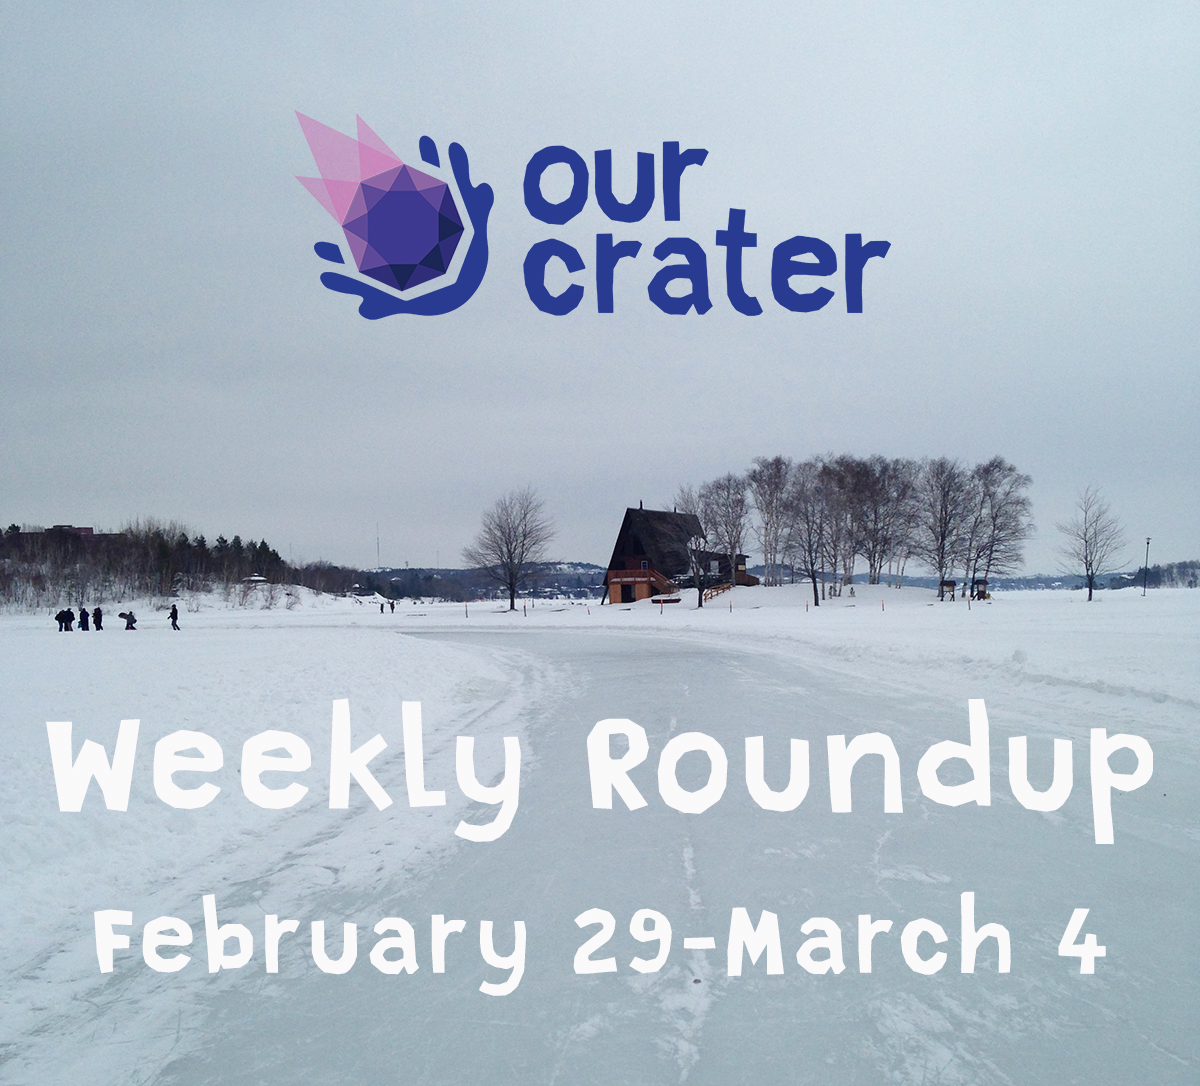 Weekly Roundup: February 29 - March 4